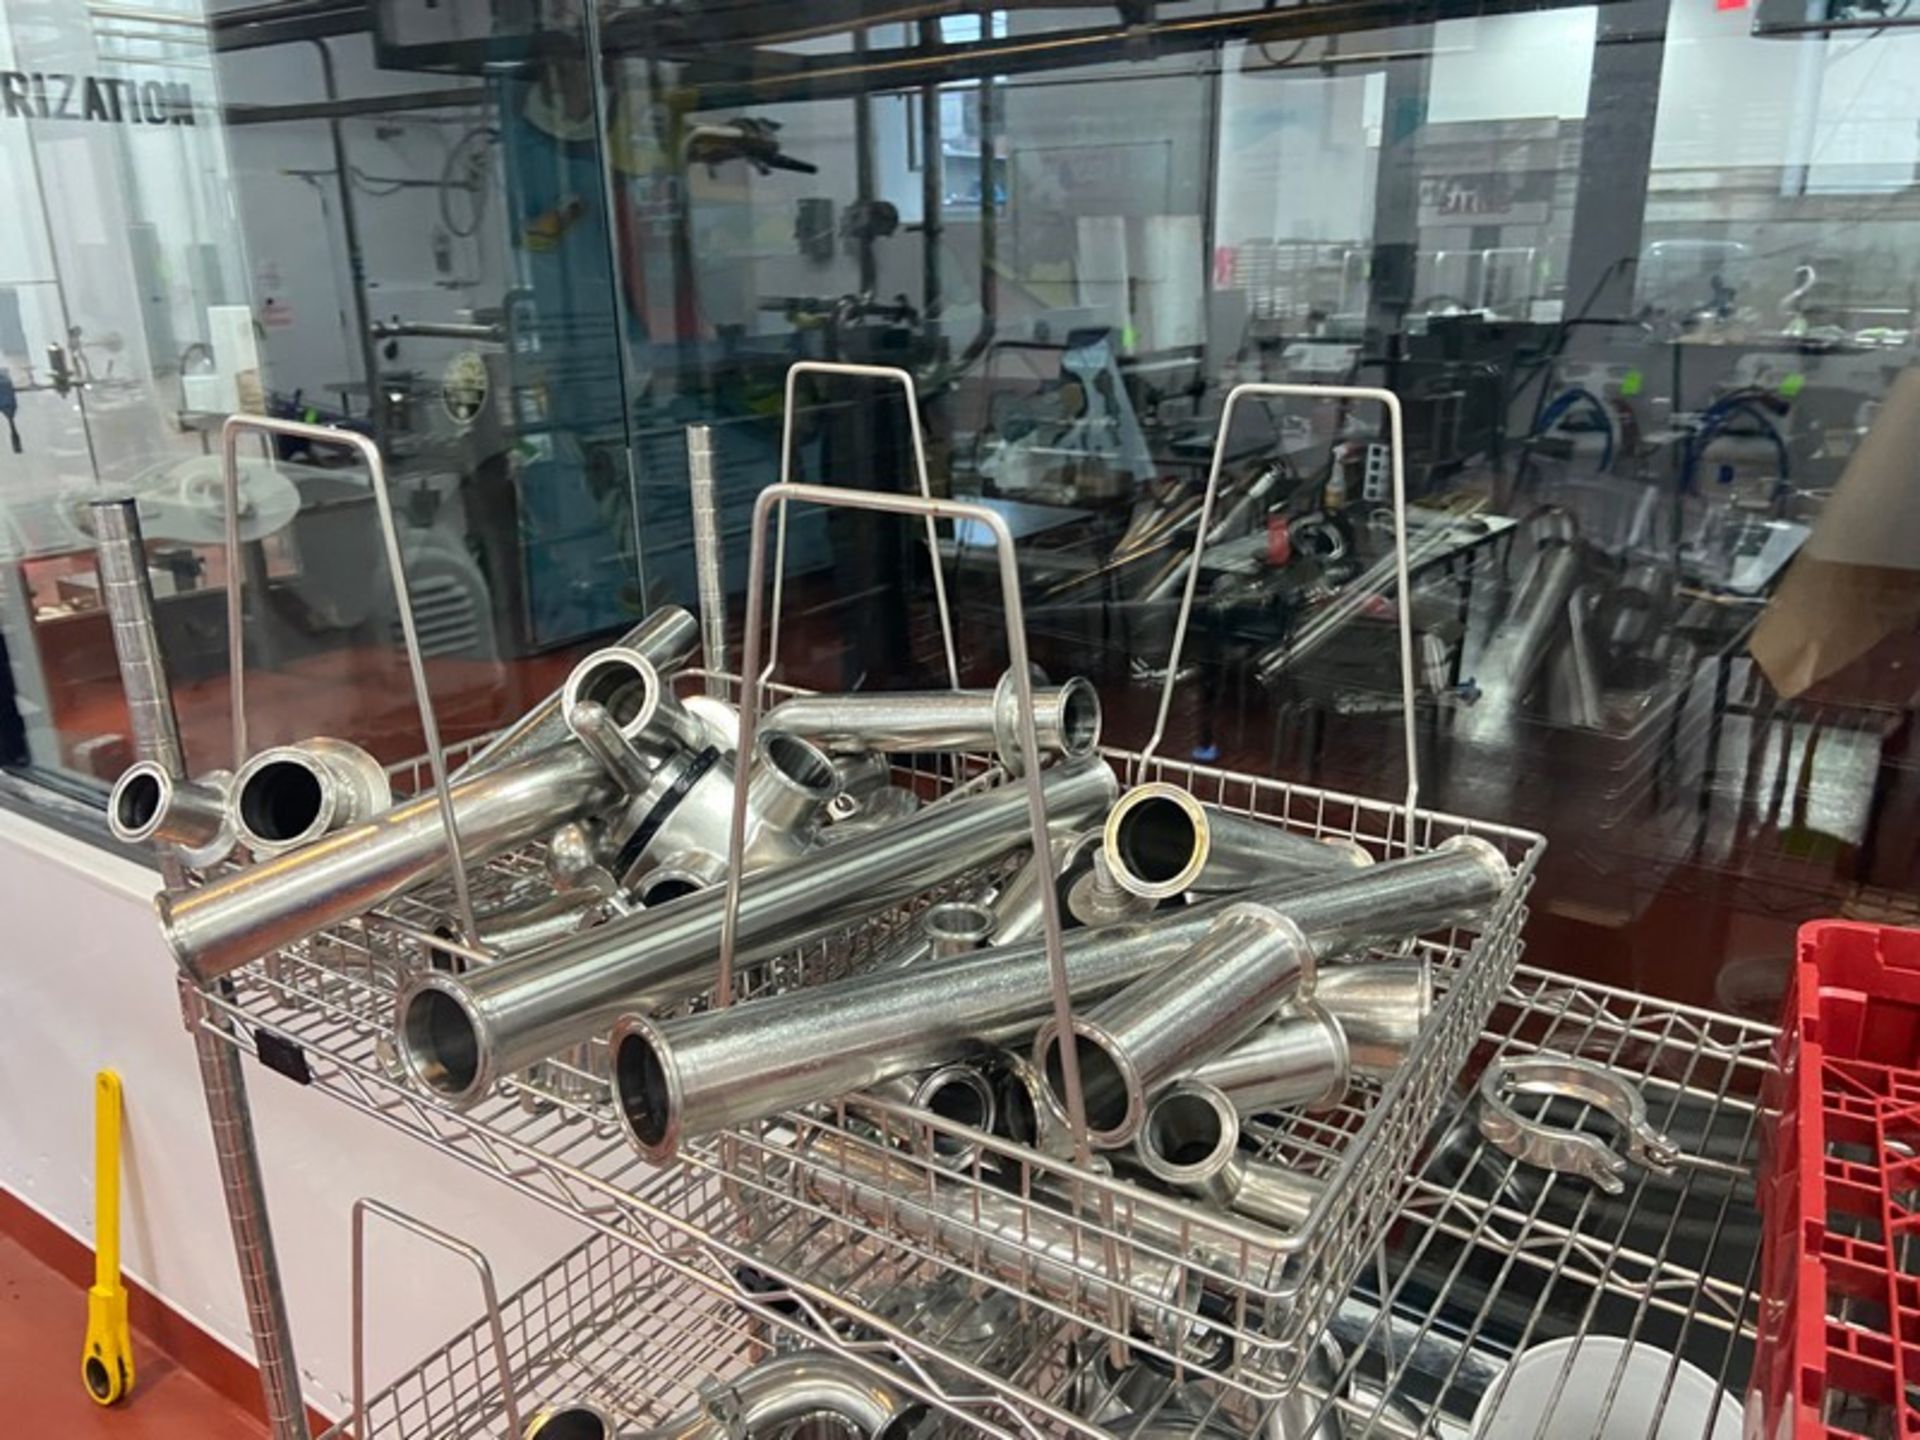 S/S Portable Rack, with S/S Fitting Contents, Includes S/S Elbows--Clamp Type, S/S Clamps, (4) S/S - Bild 2 aus 10